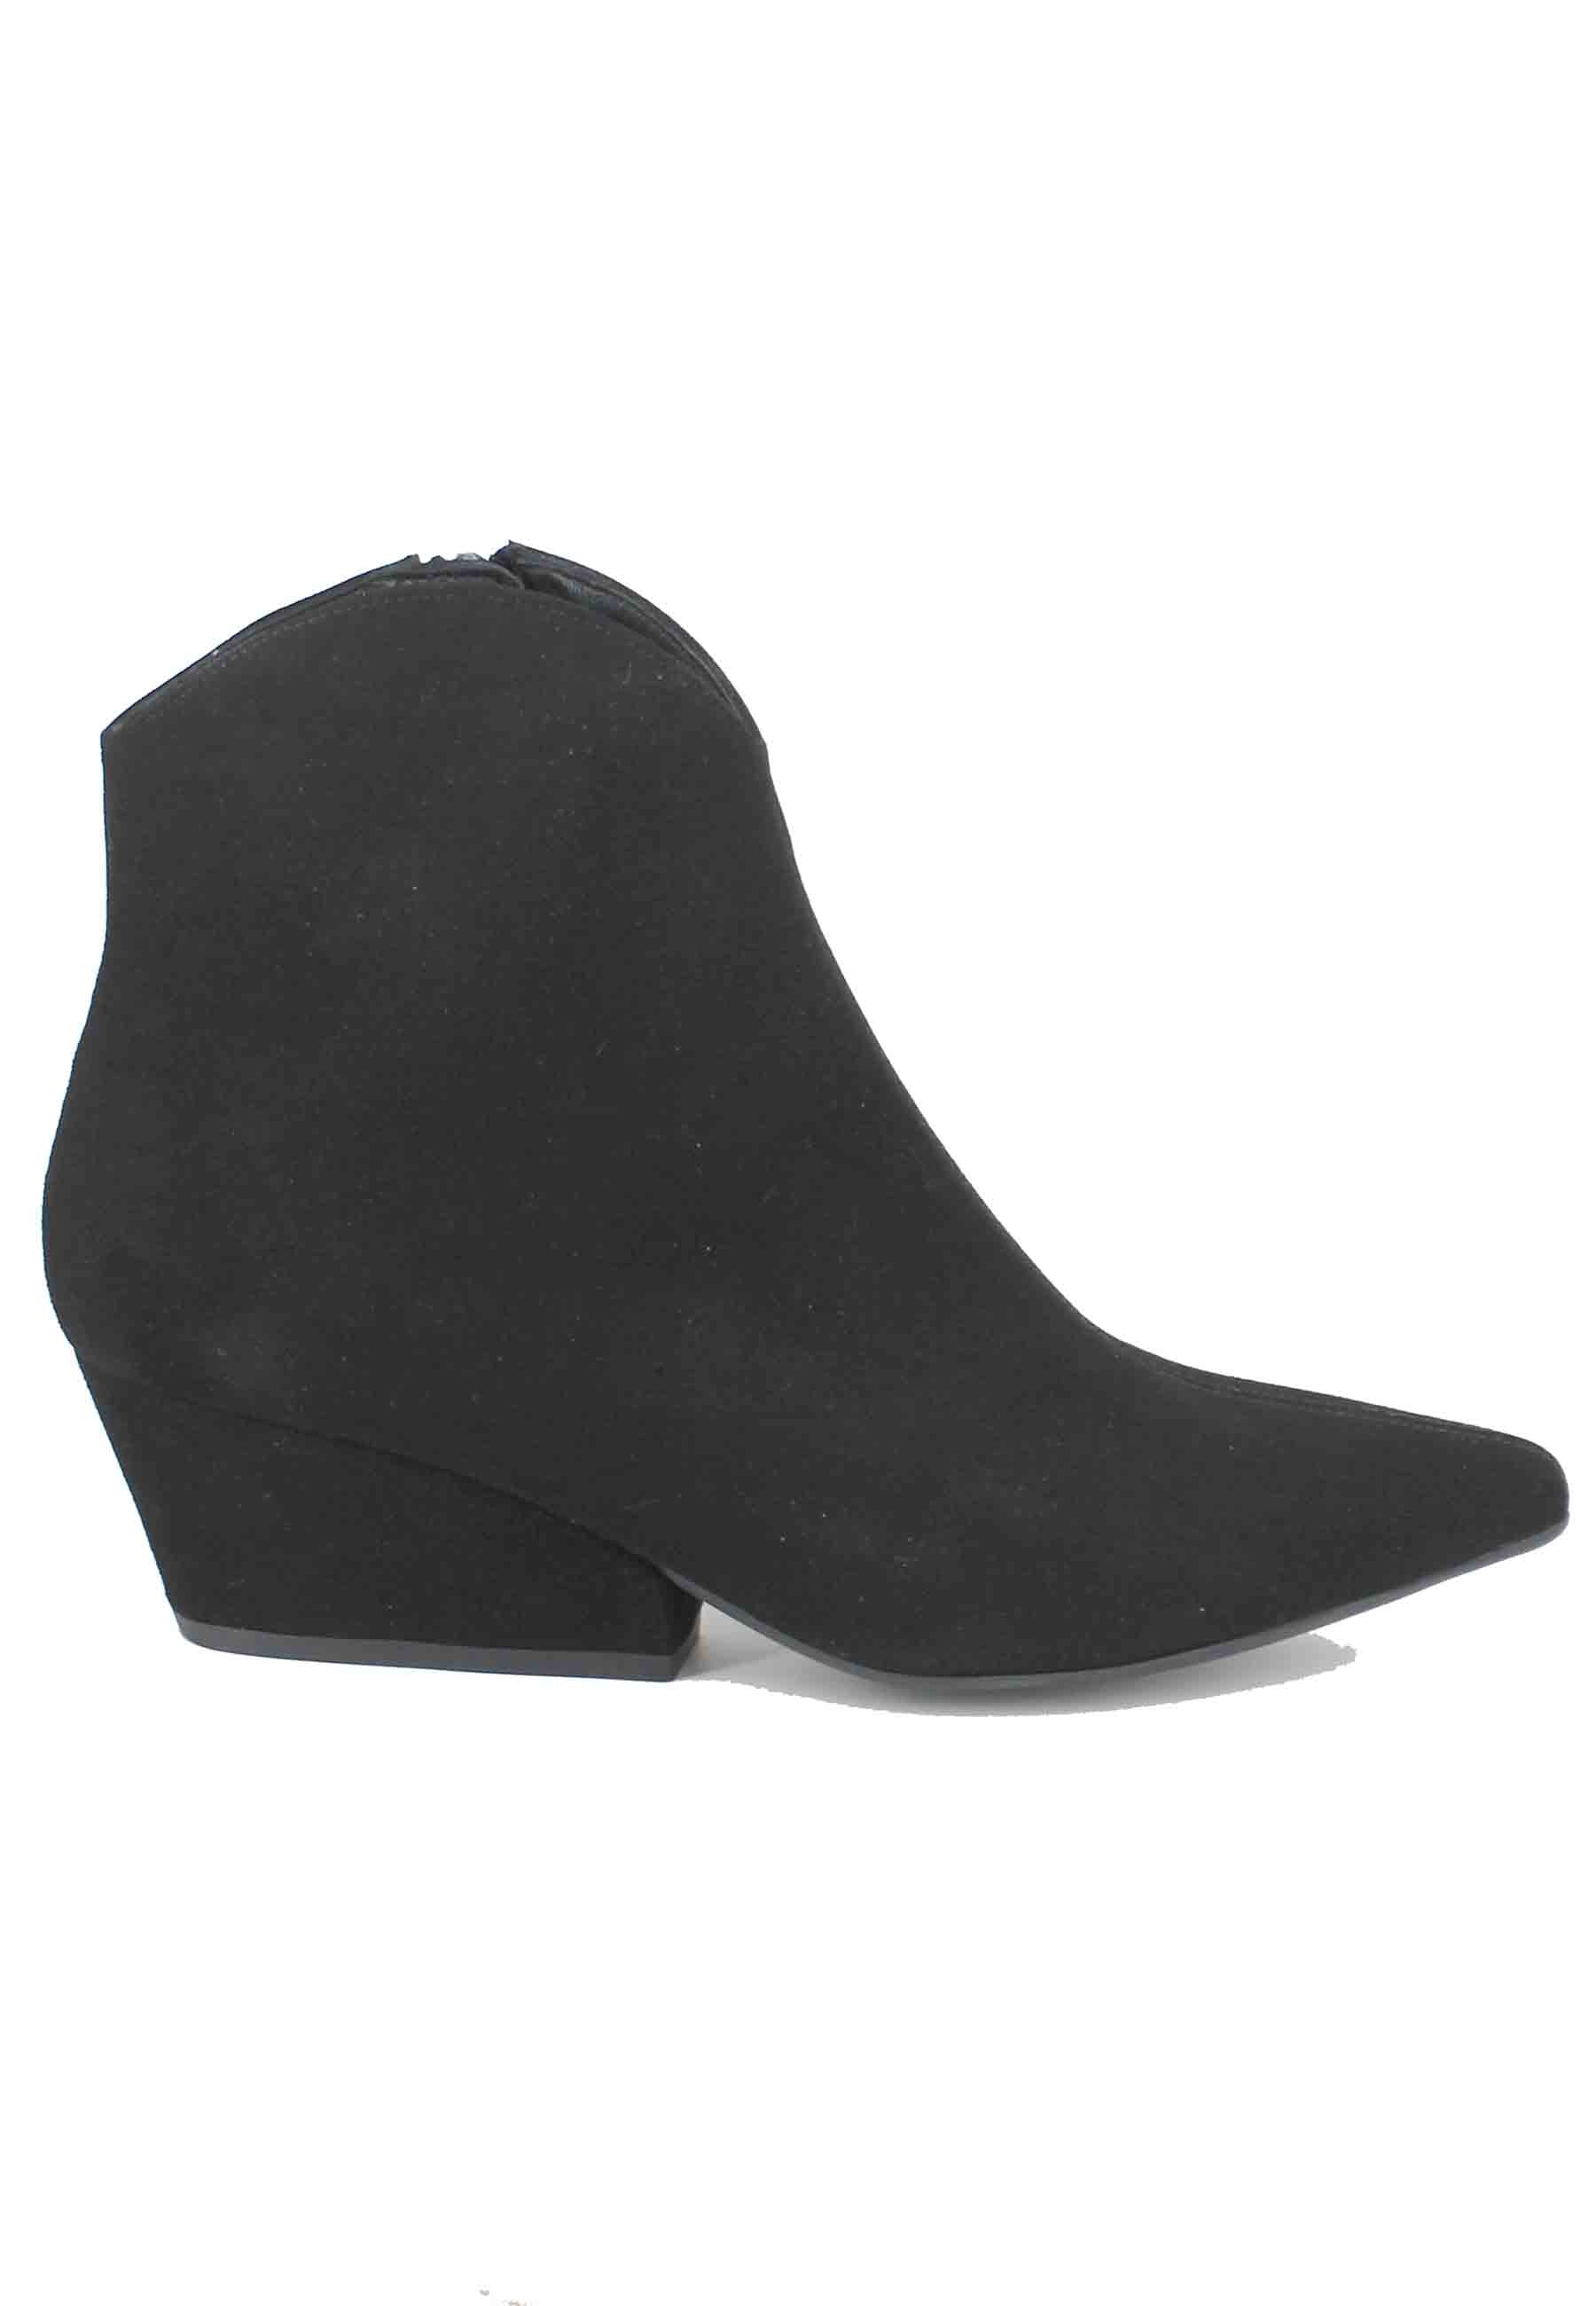 Taxani women's ankle boots in black suede